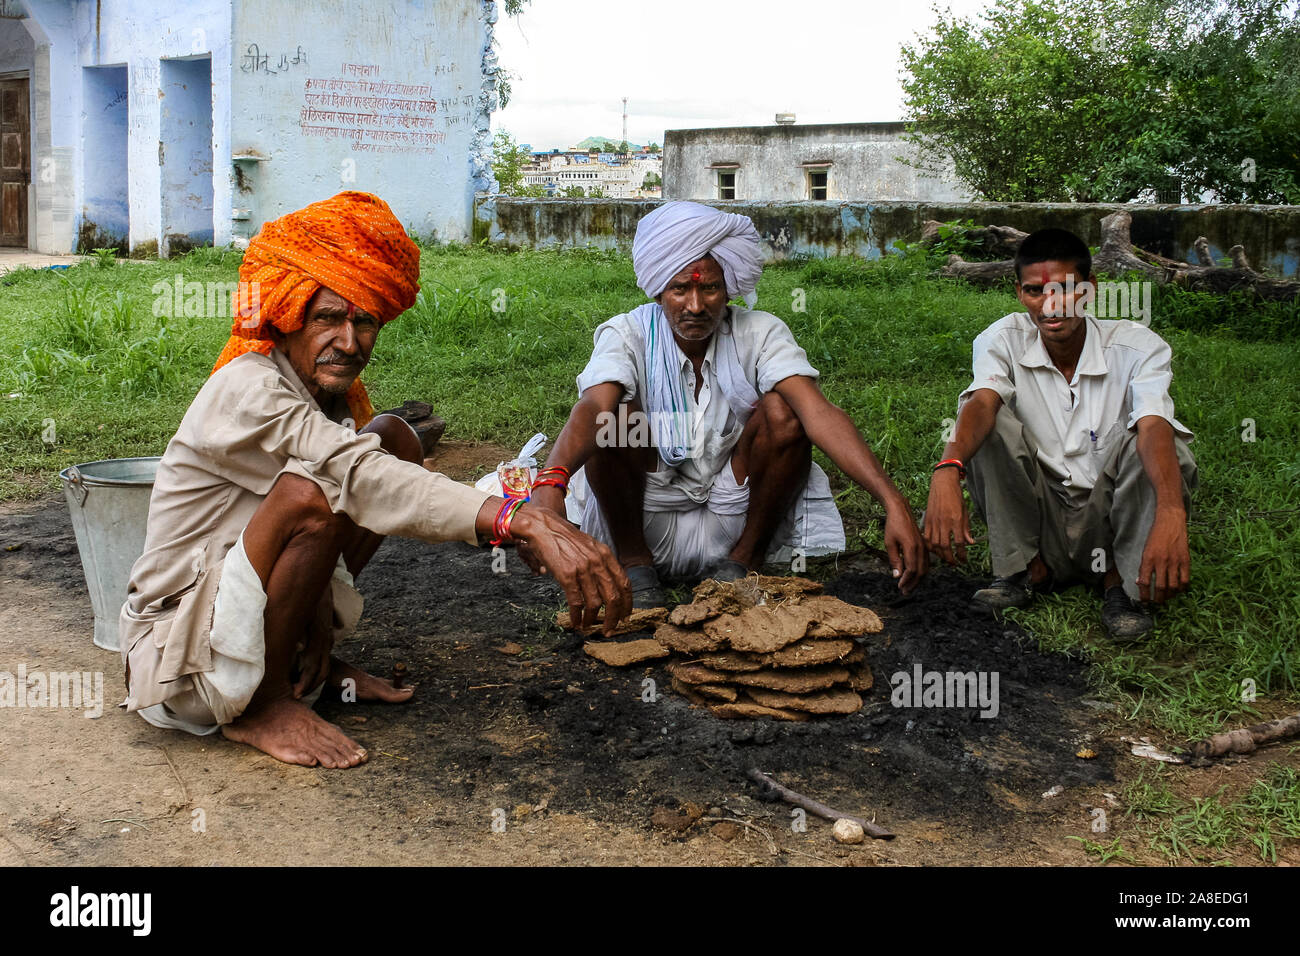 Pushkar, Rajasthan, India: three Indian men with turbans sitting on their heels in front of a pile of dry dung ready for fire. Stock Photo